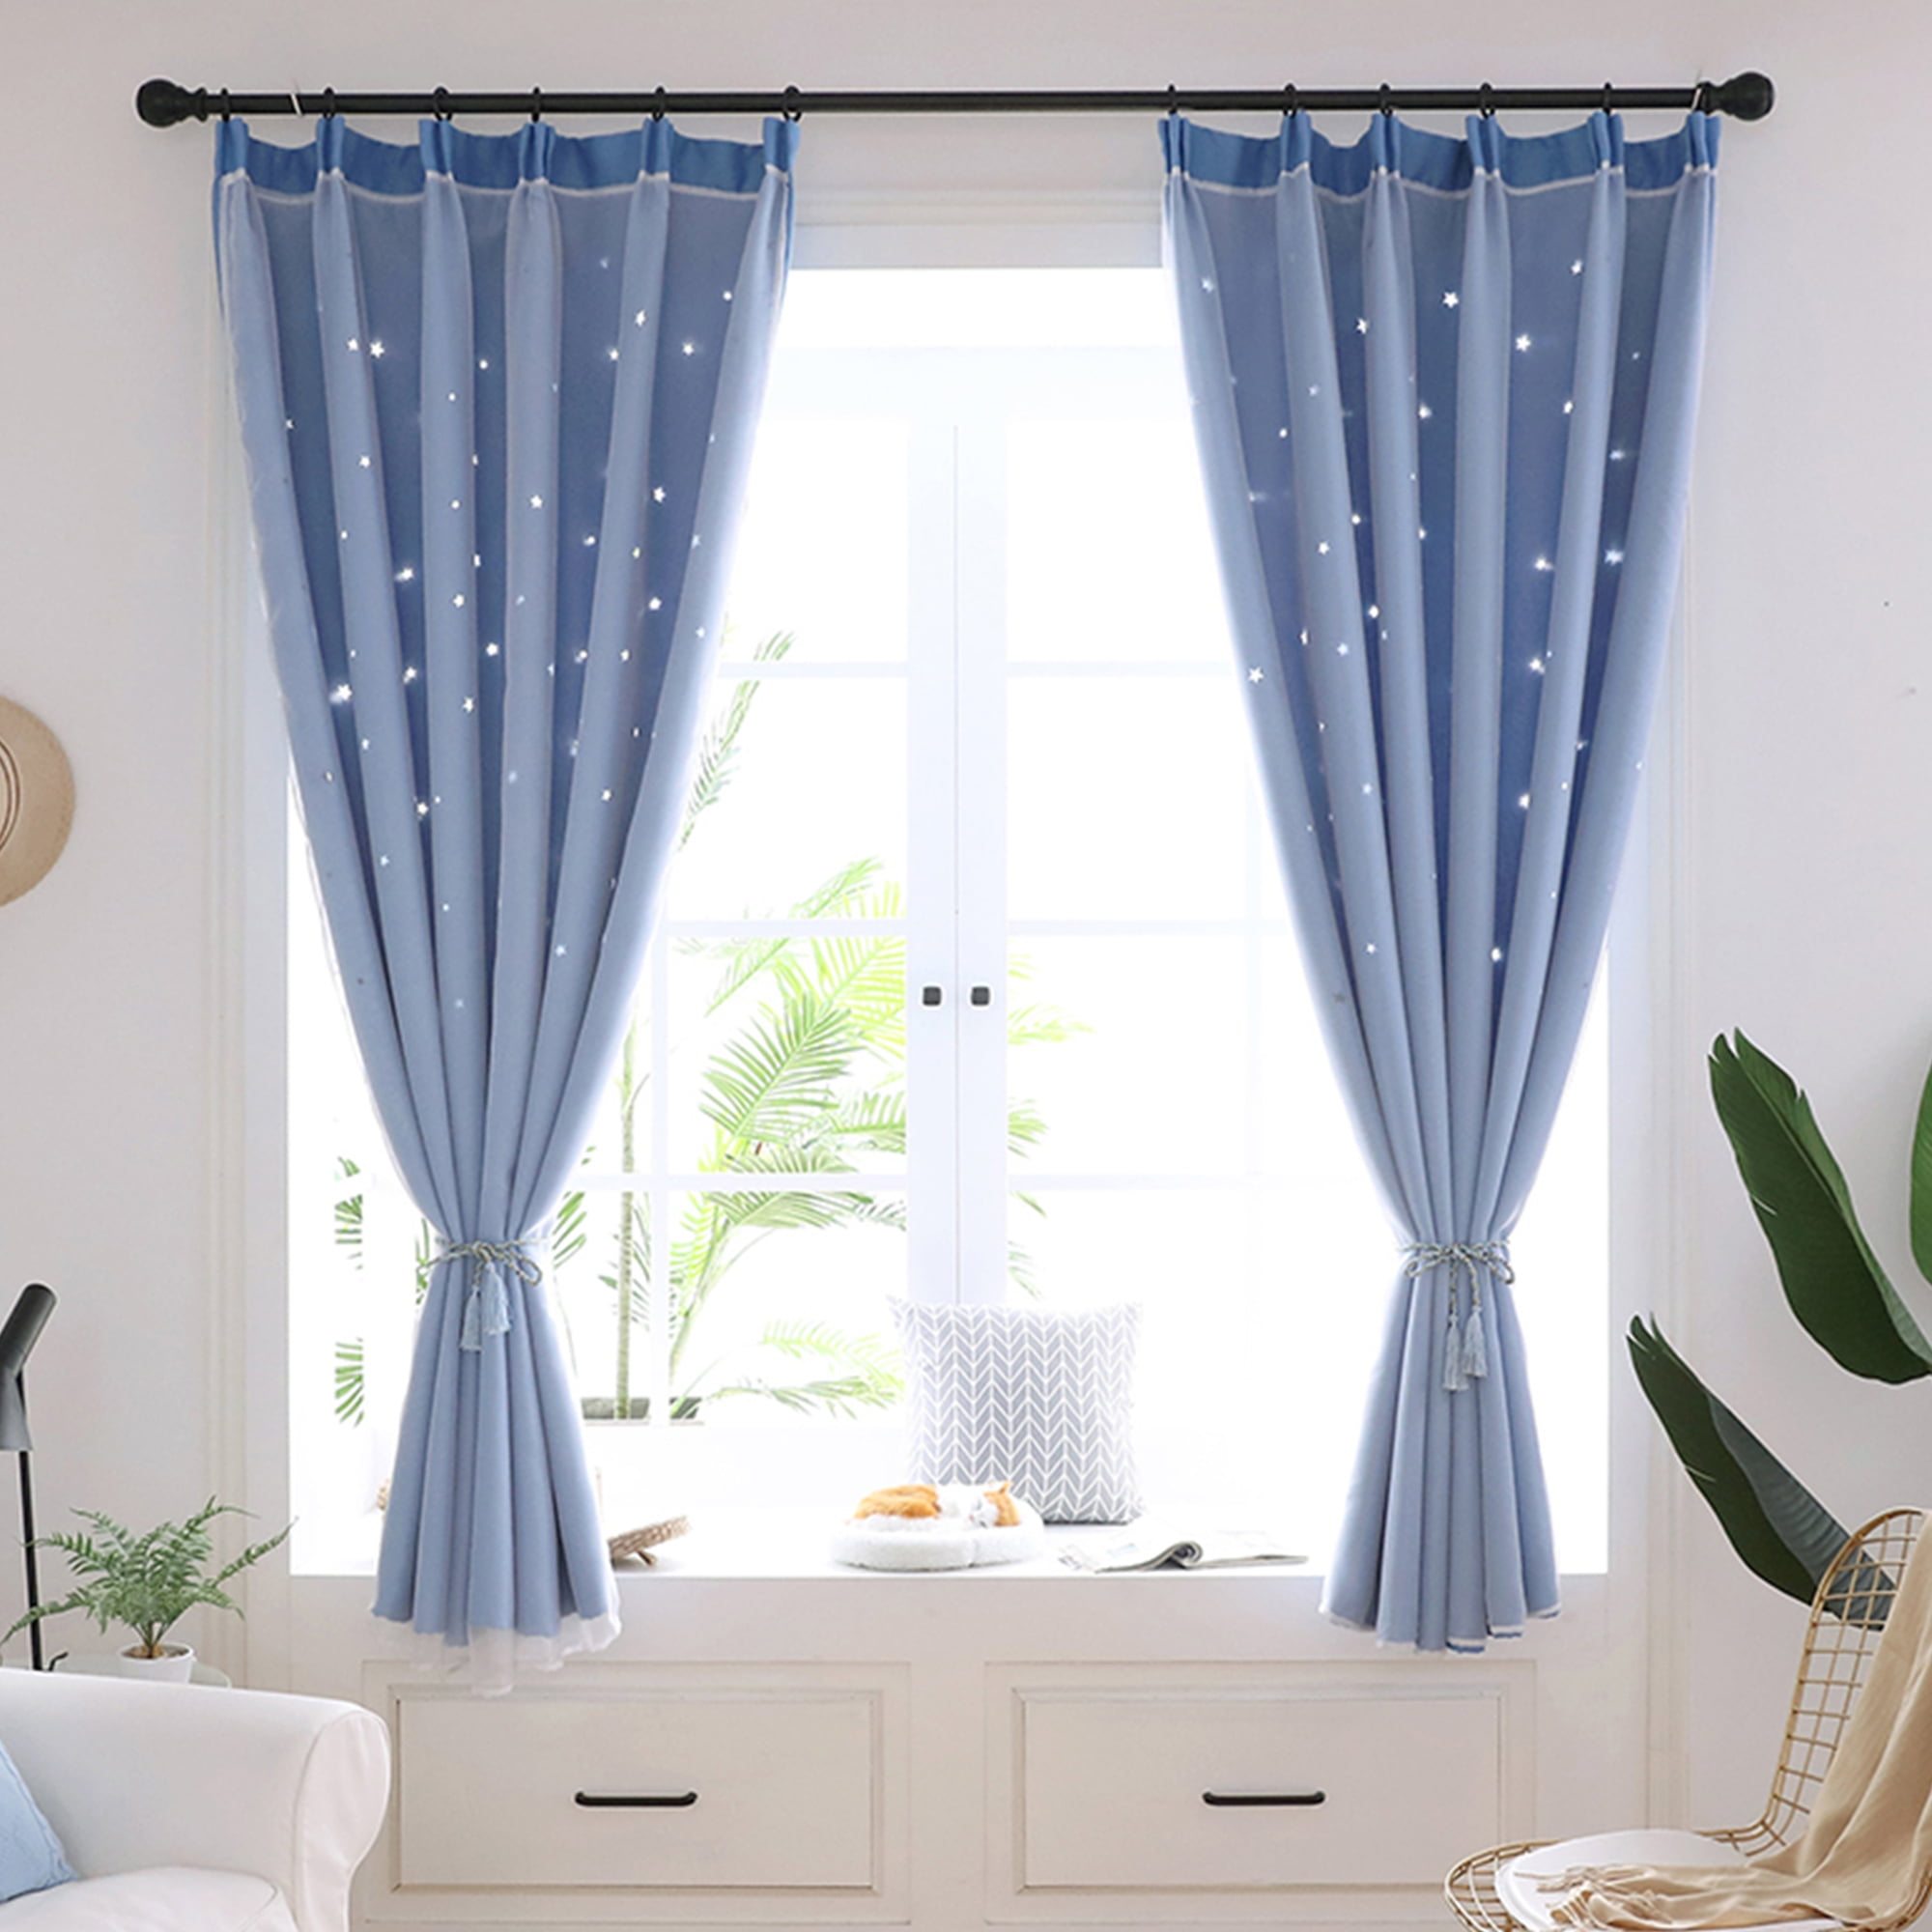  1pcs,Double Layer Window Curtains-Shade Cut Out Stars Panel and  Gauze Valance with Eyelet Top Colorful Blackout Curtain Voile Sheer Curtain  Panel for Kids Girls Bedroom Living Room,Multicolour : Everything Else